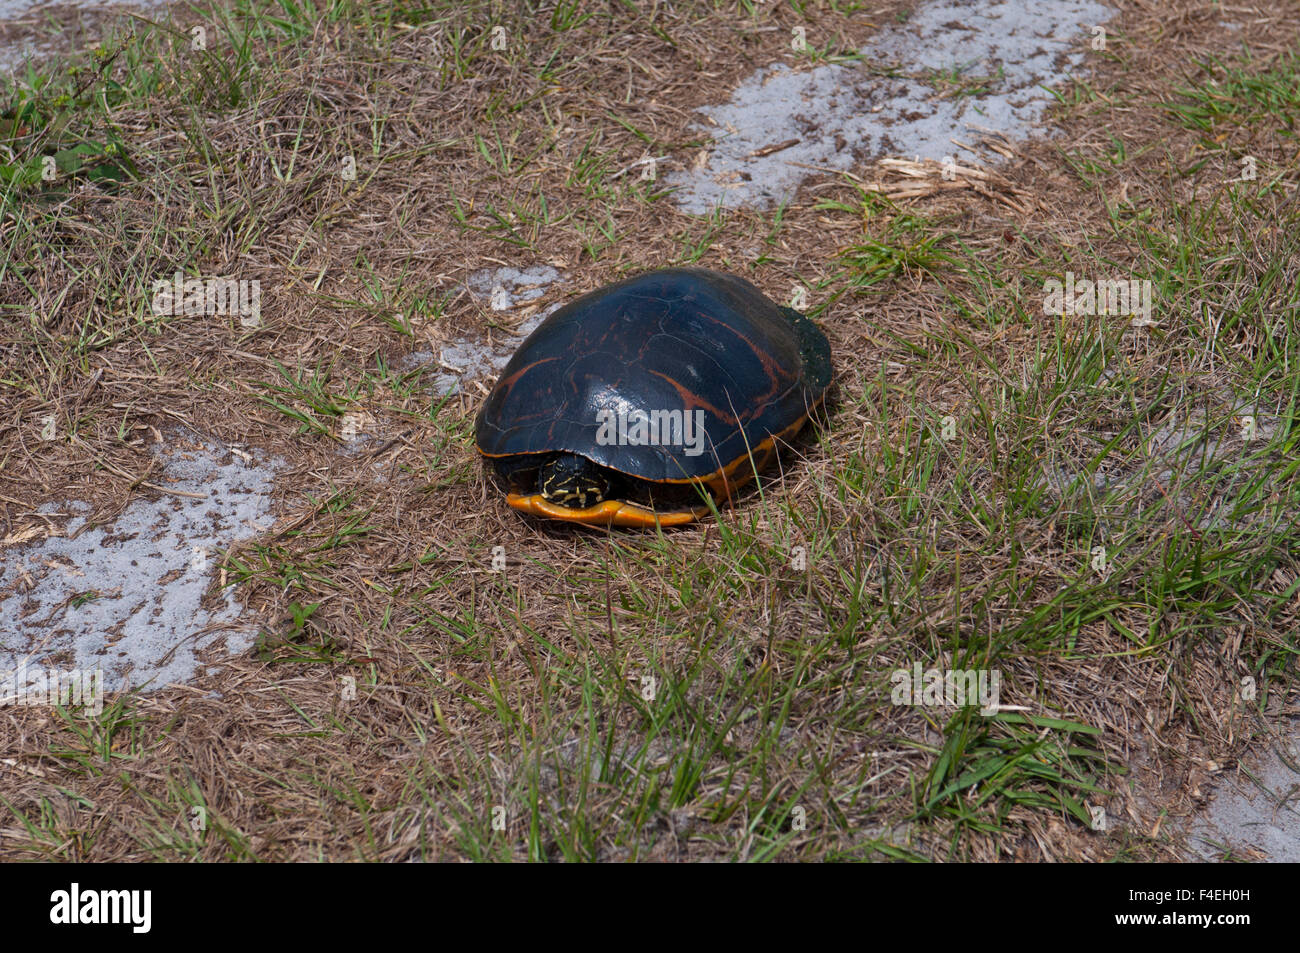 North America, USA, Florida, Immokalee, Red-bellied Cooter Stock Photo